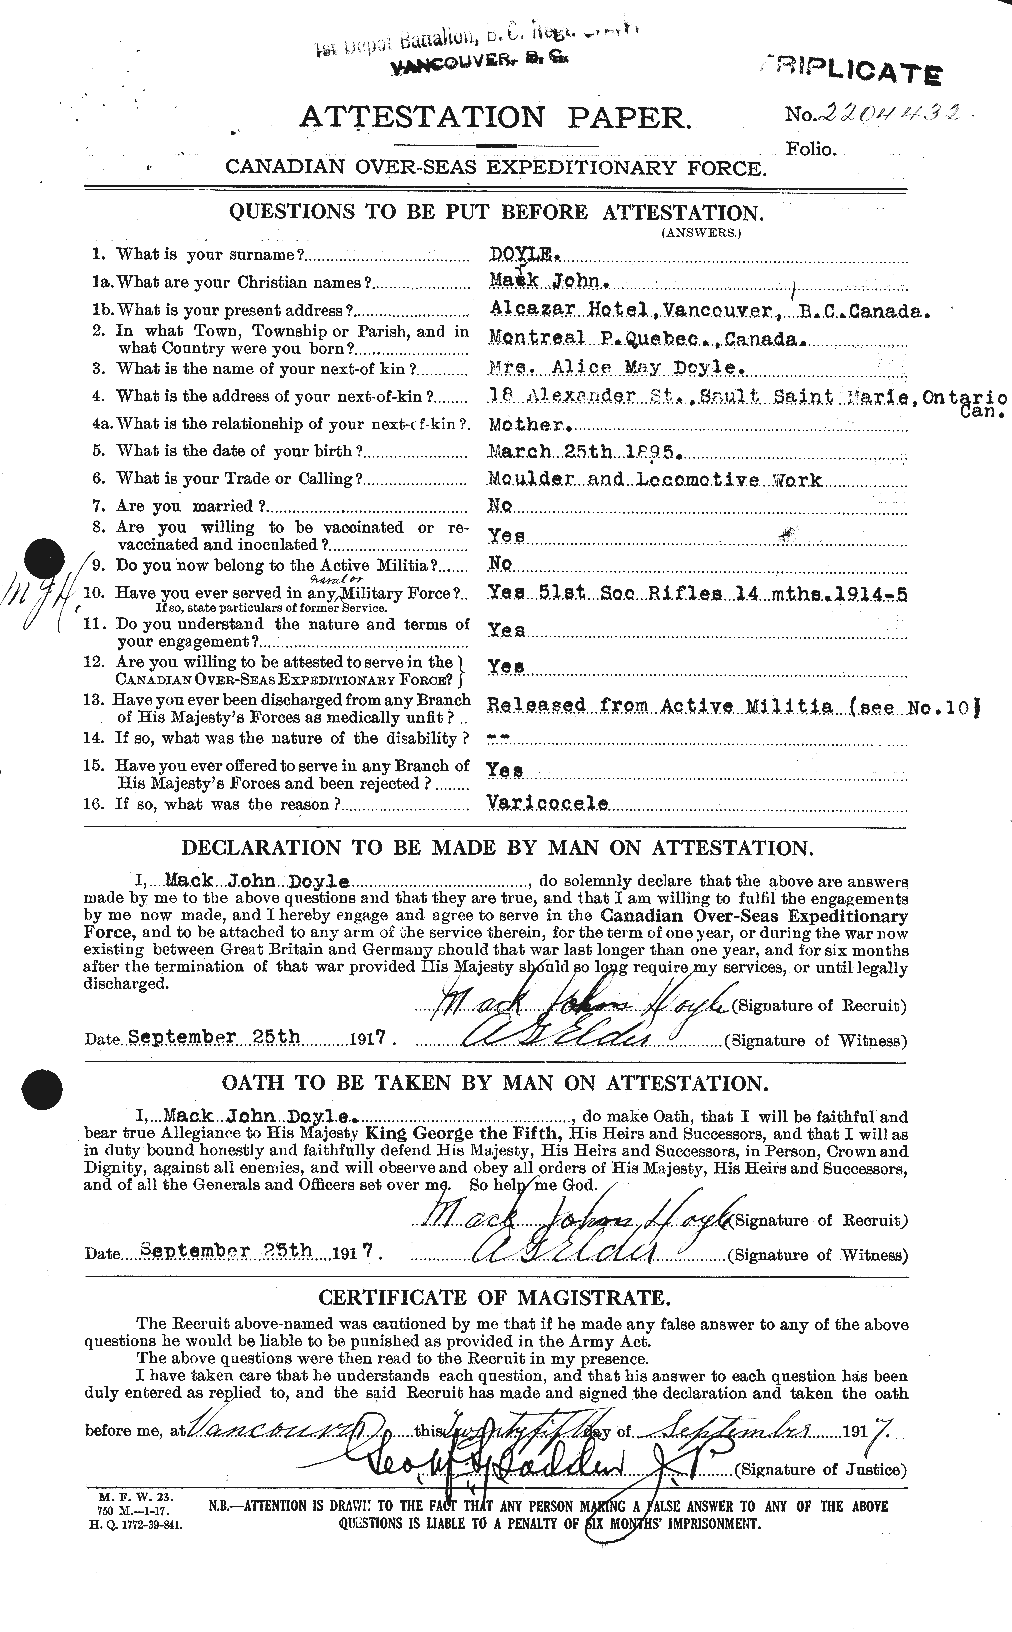 Personnel Records of the First World War - CEF 298638a